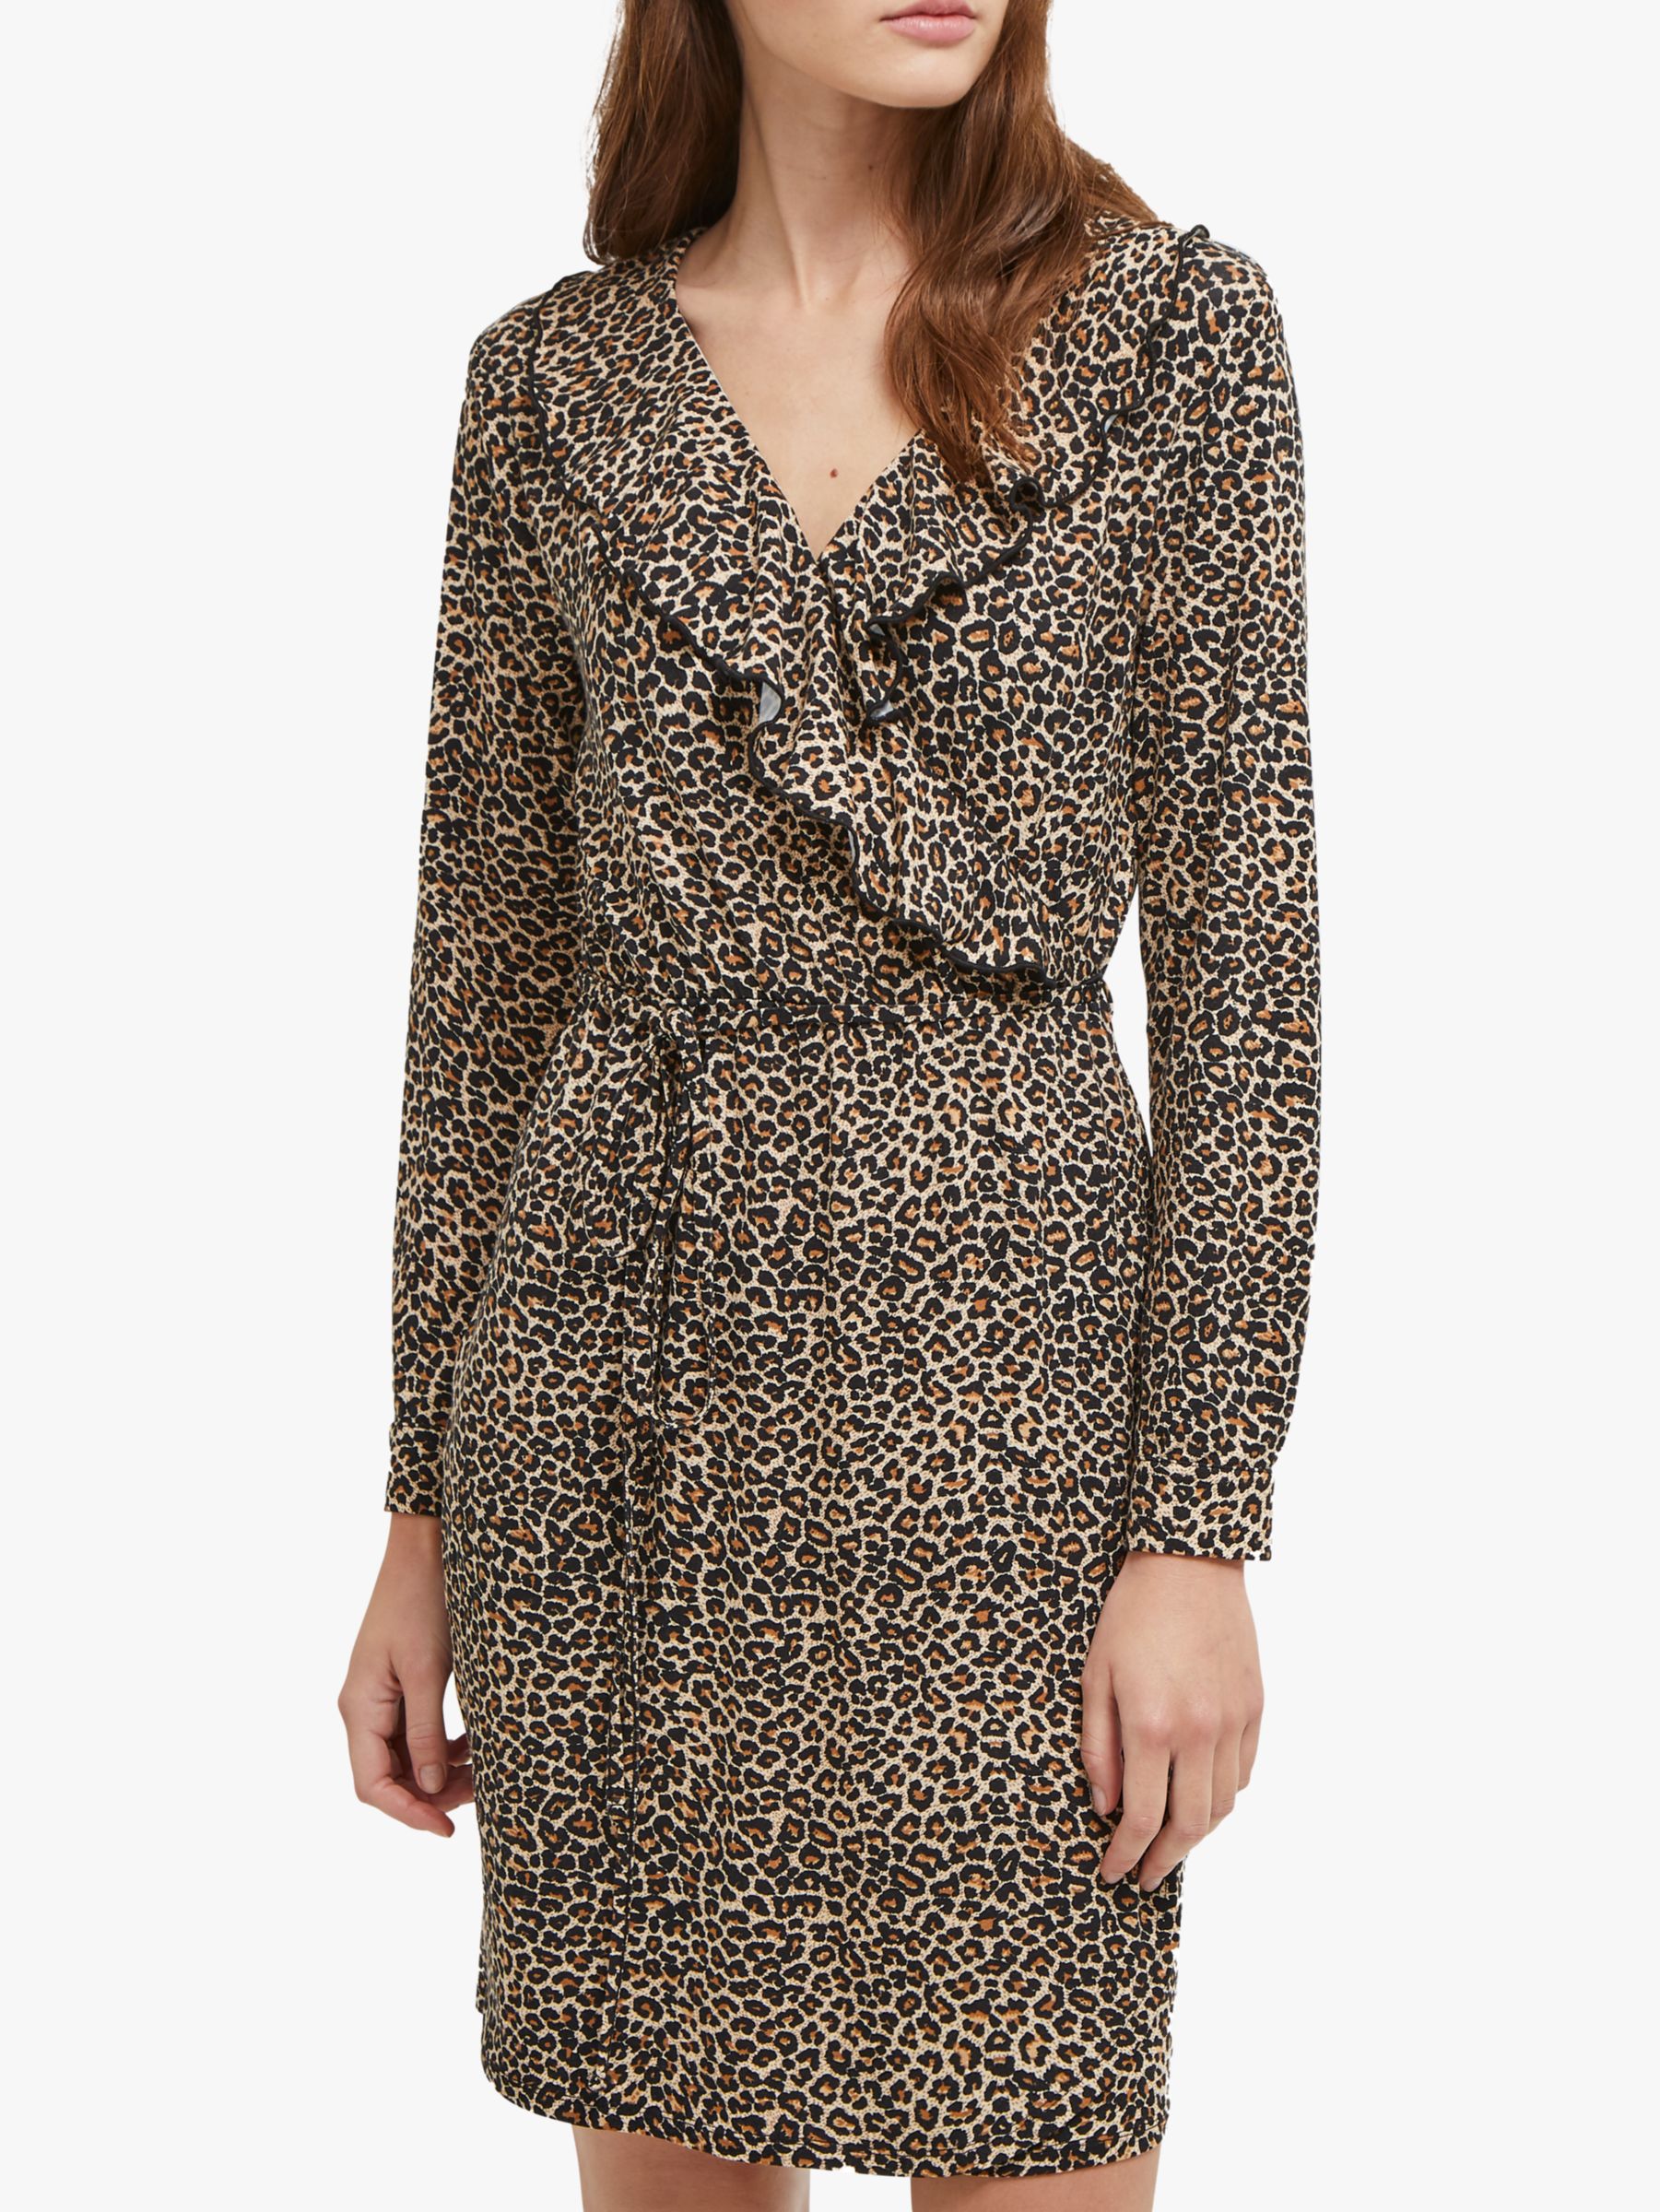 French Connection Animal Print Wrap Dress, Brown Leopard